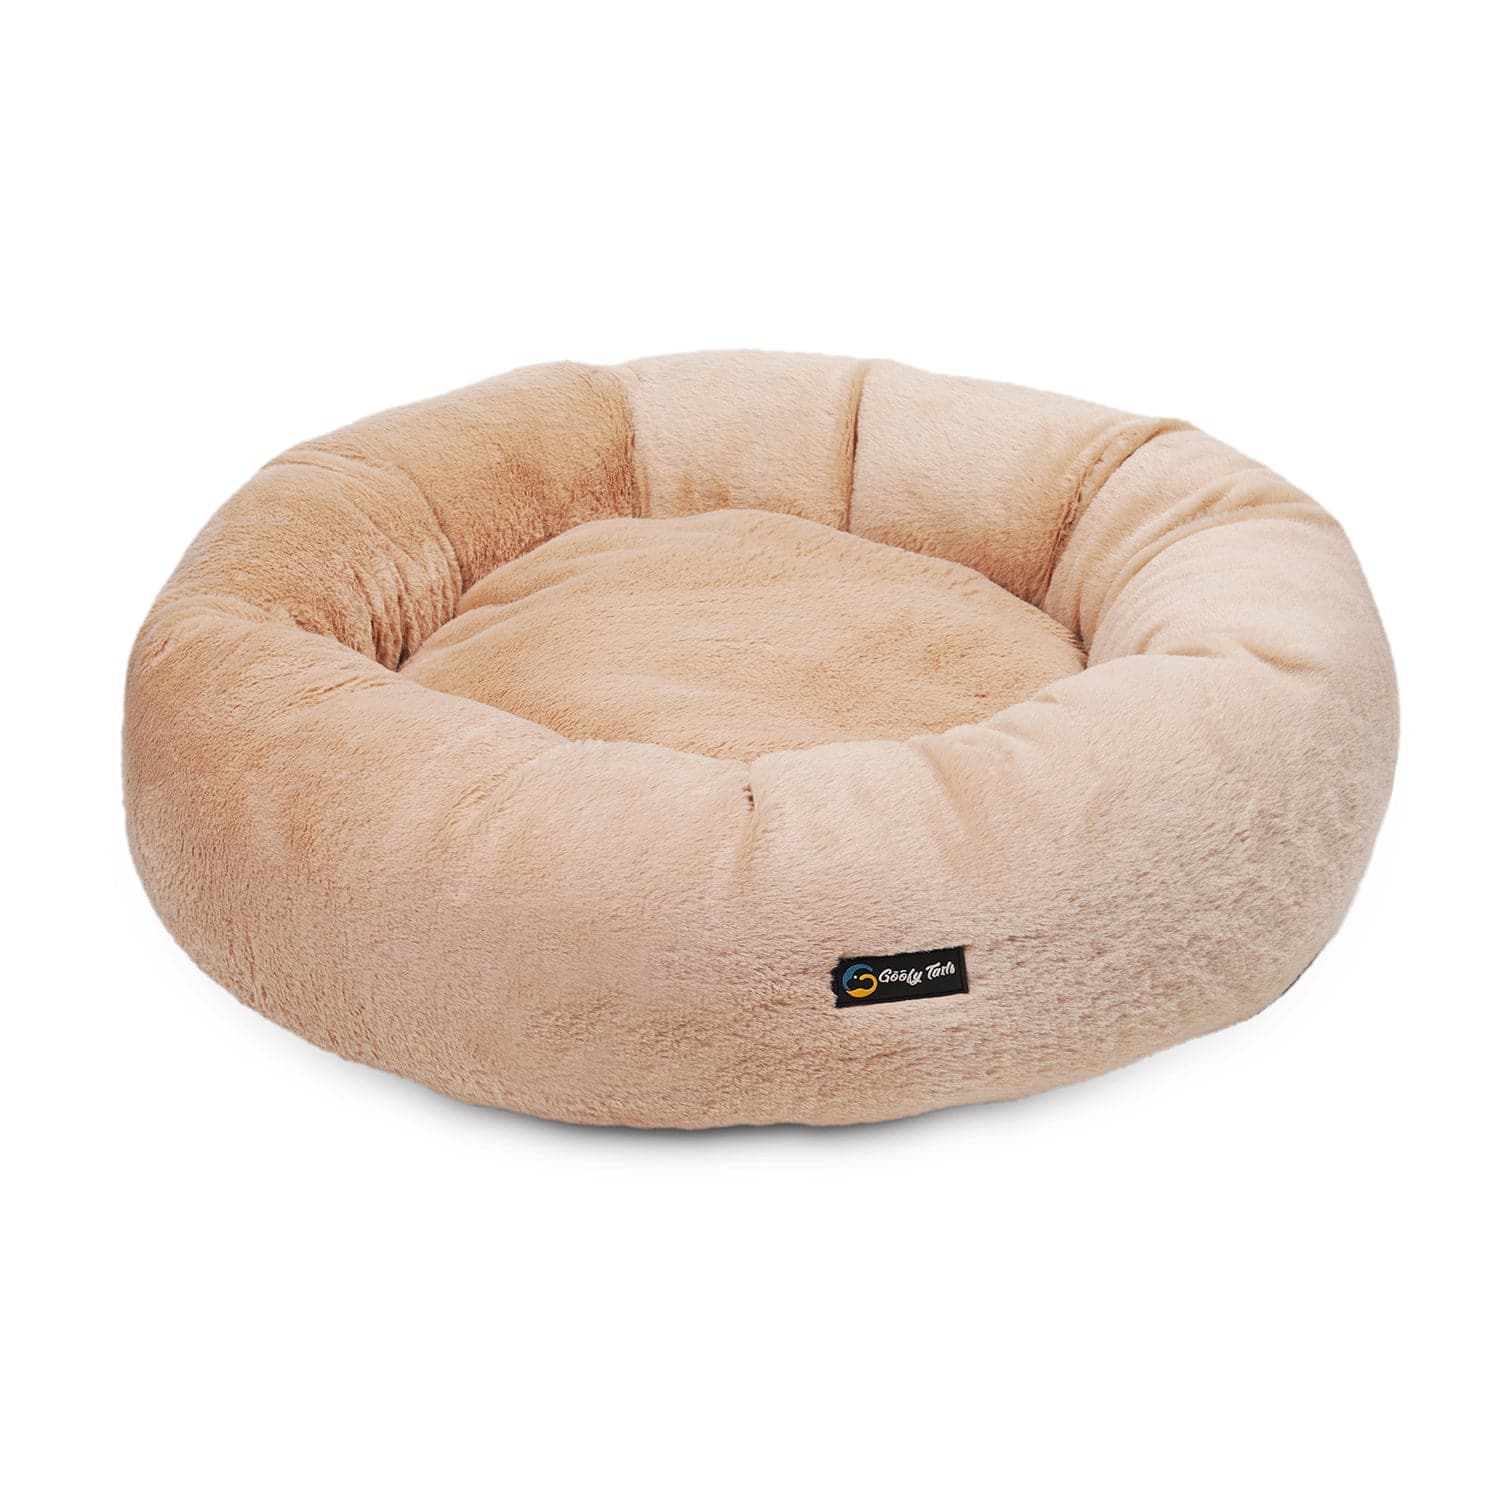 Goofy Tails Donut Sleeping Bed for Cats & Kittens | Luxurious Anti-Anxiety Cuddler Cat Bed (Beige) (7660568576150)